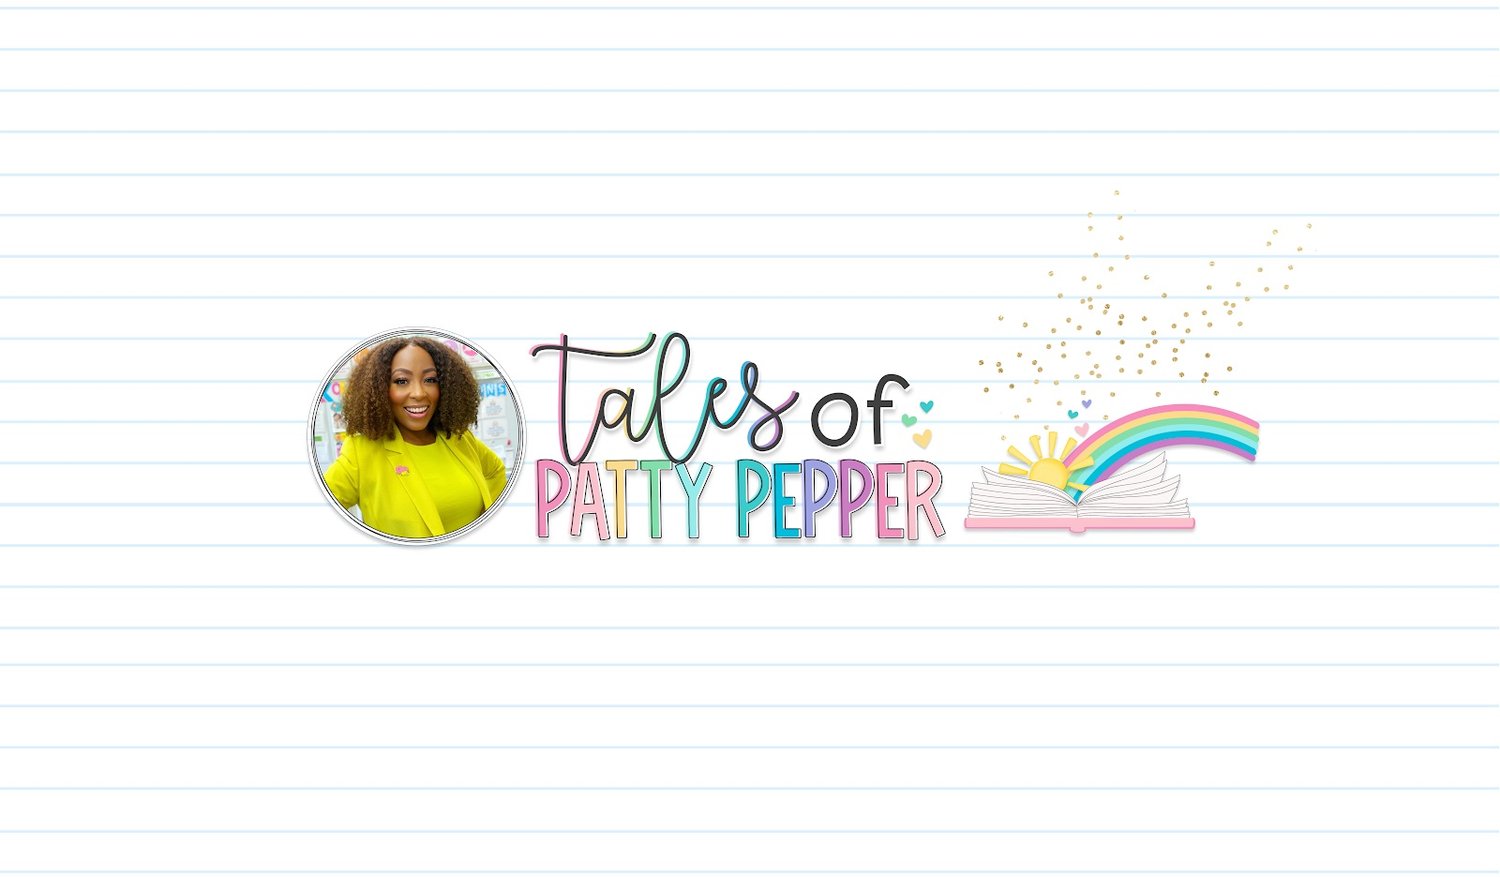 Tales of Patty Pepper